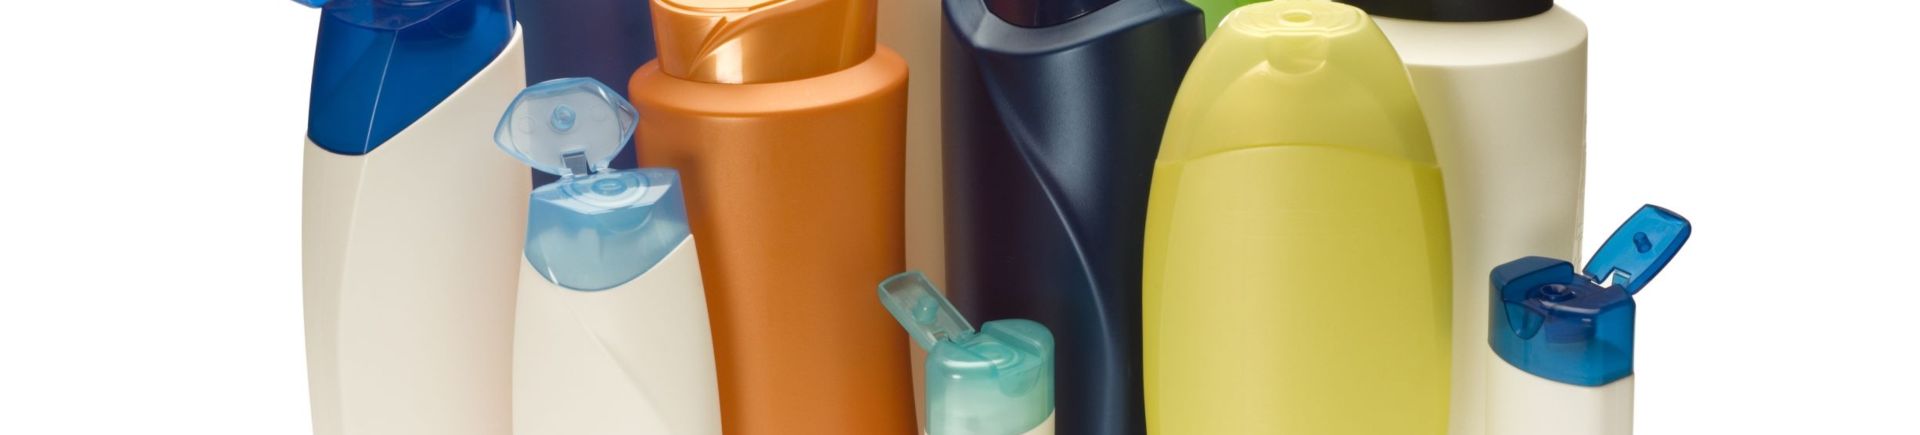 recyclable shampoo bottles